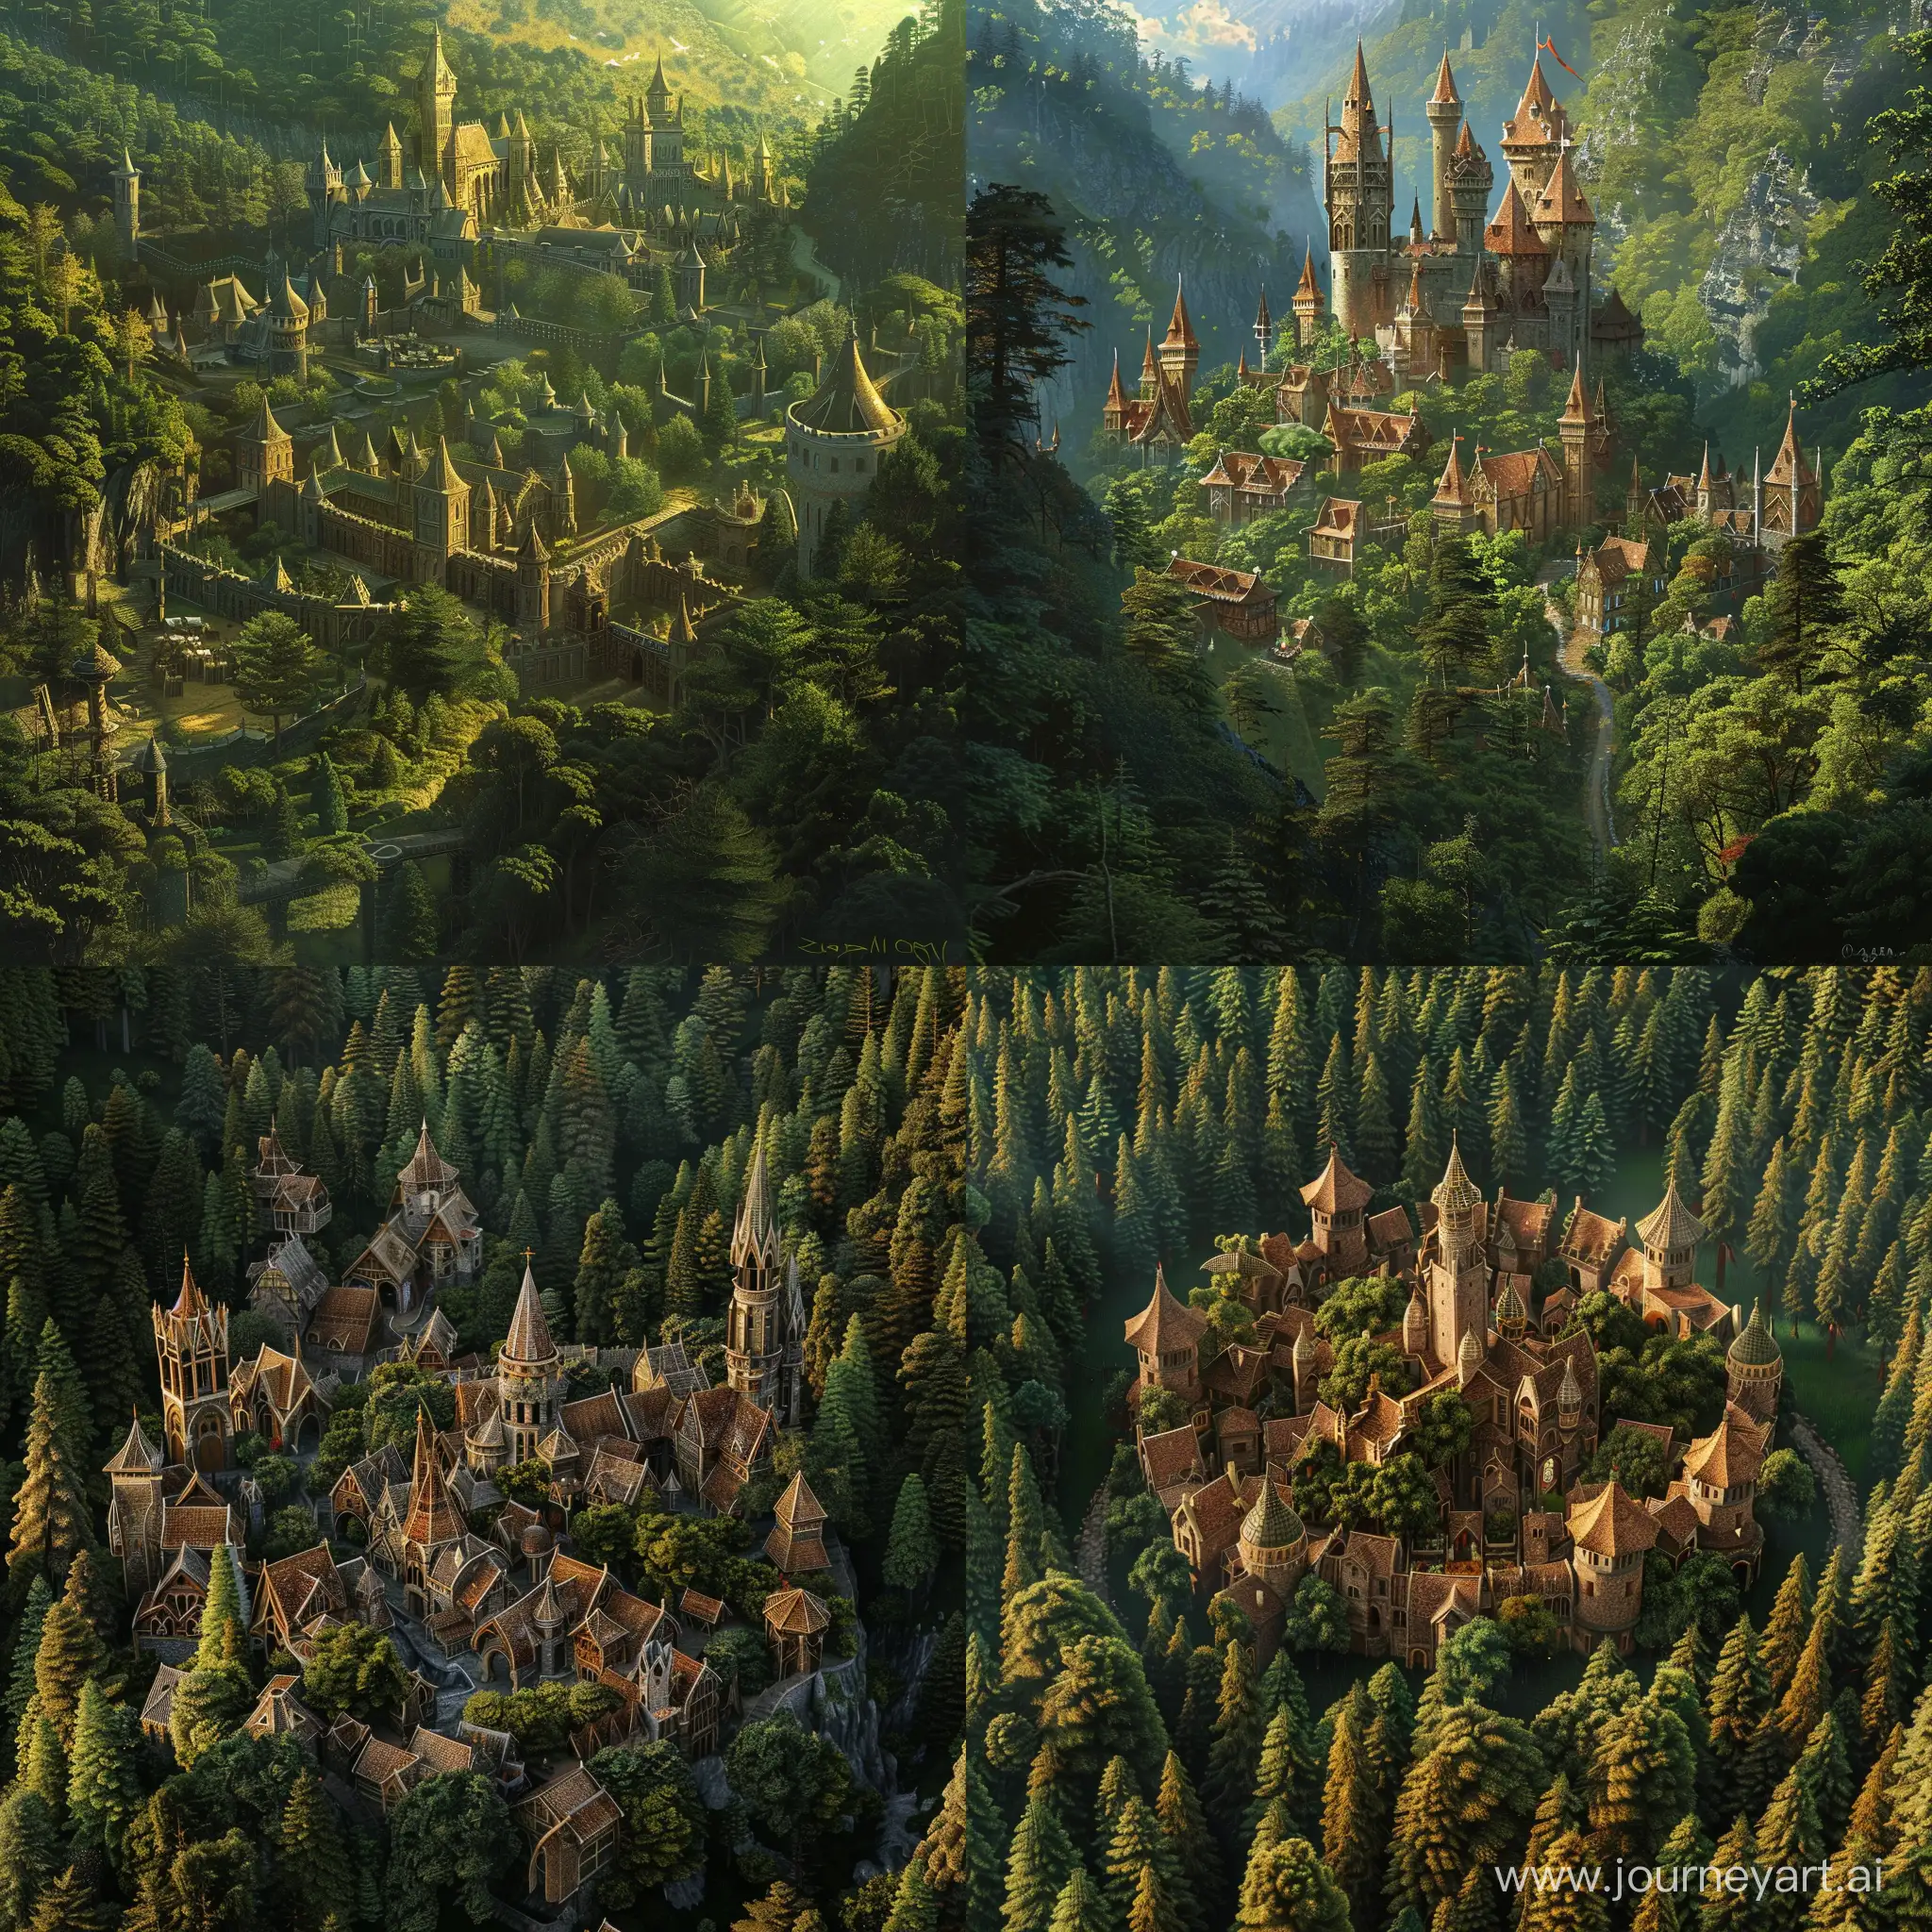 A medieval elven city surrounded by a forest